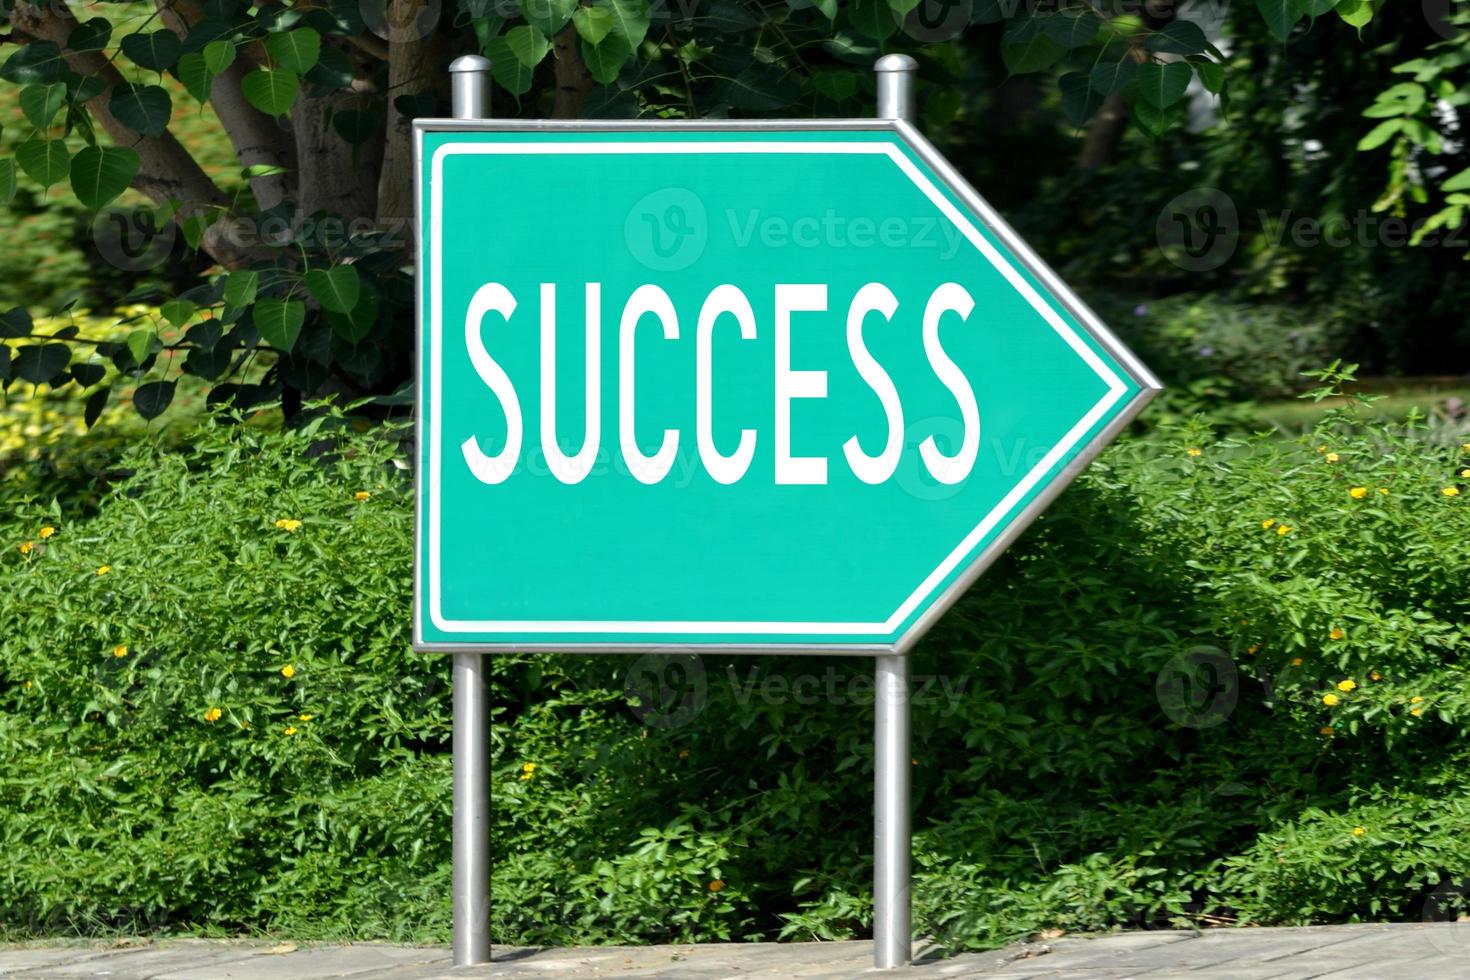 Success - Green Arrow Signpost and Bush in Background photo